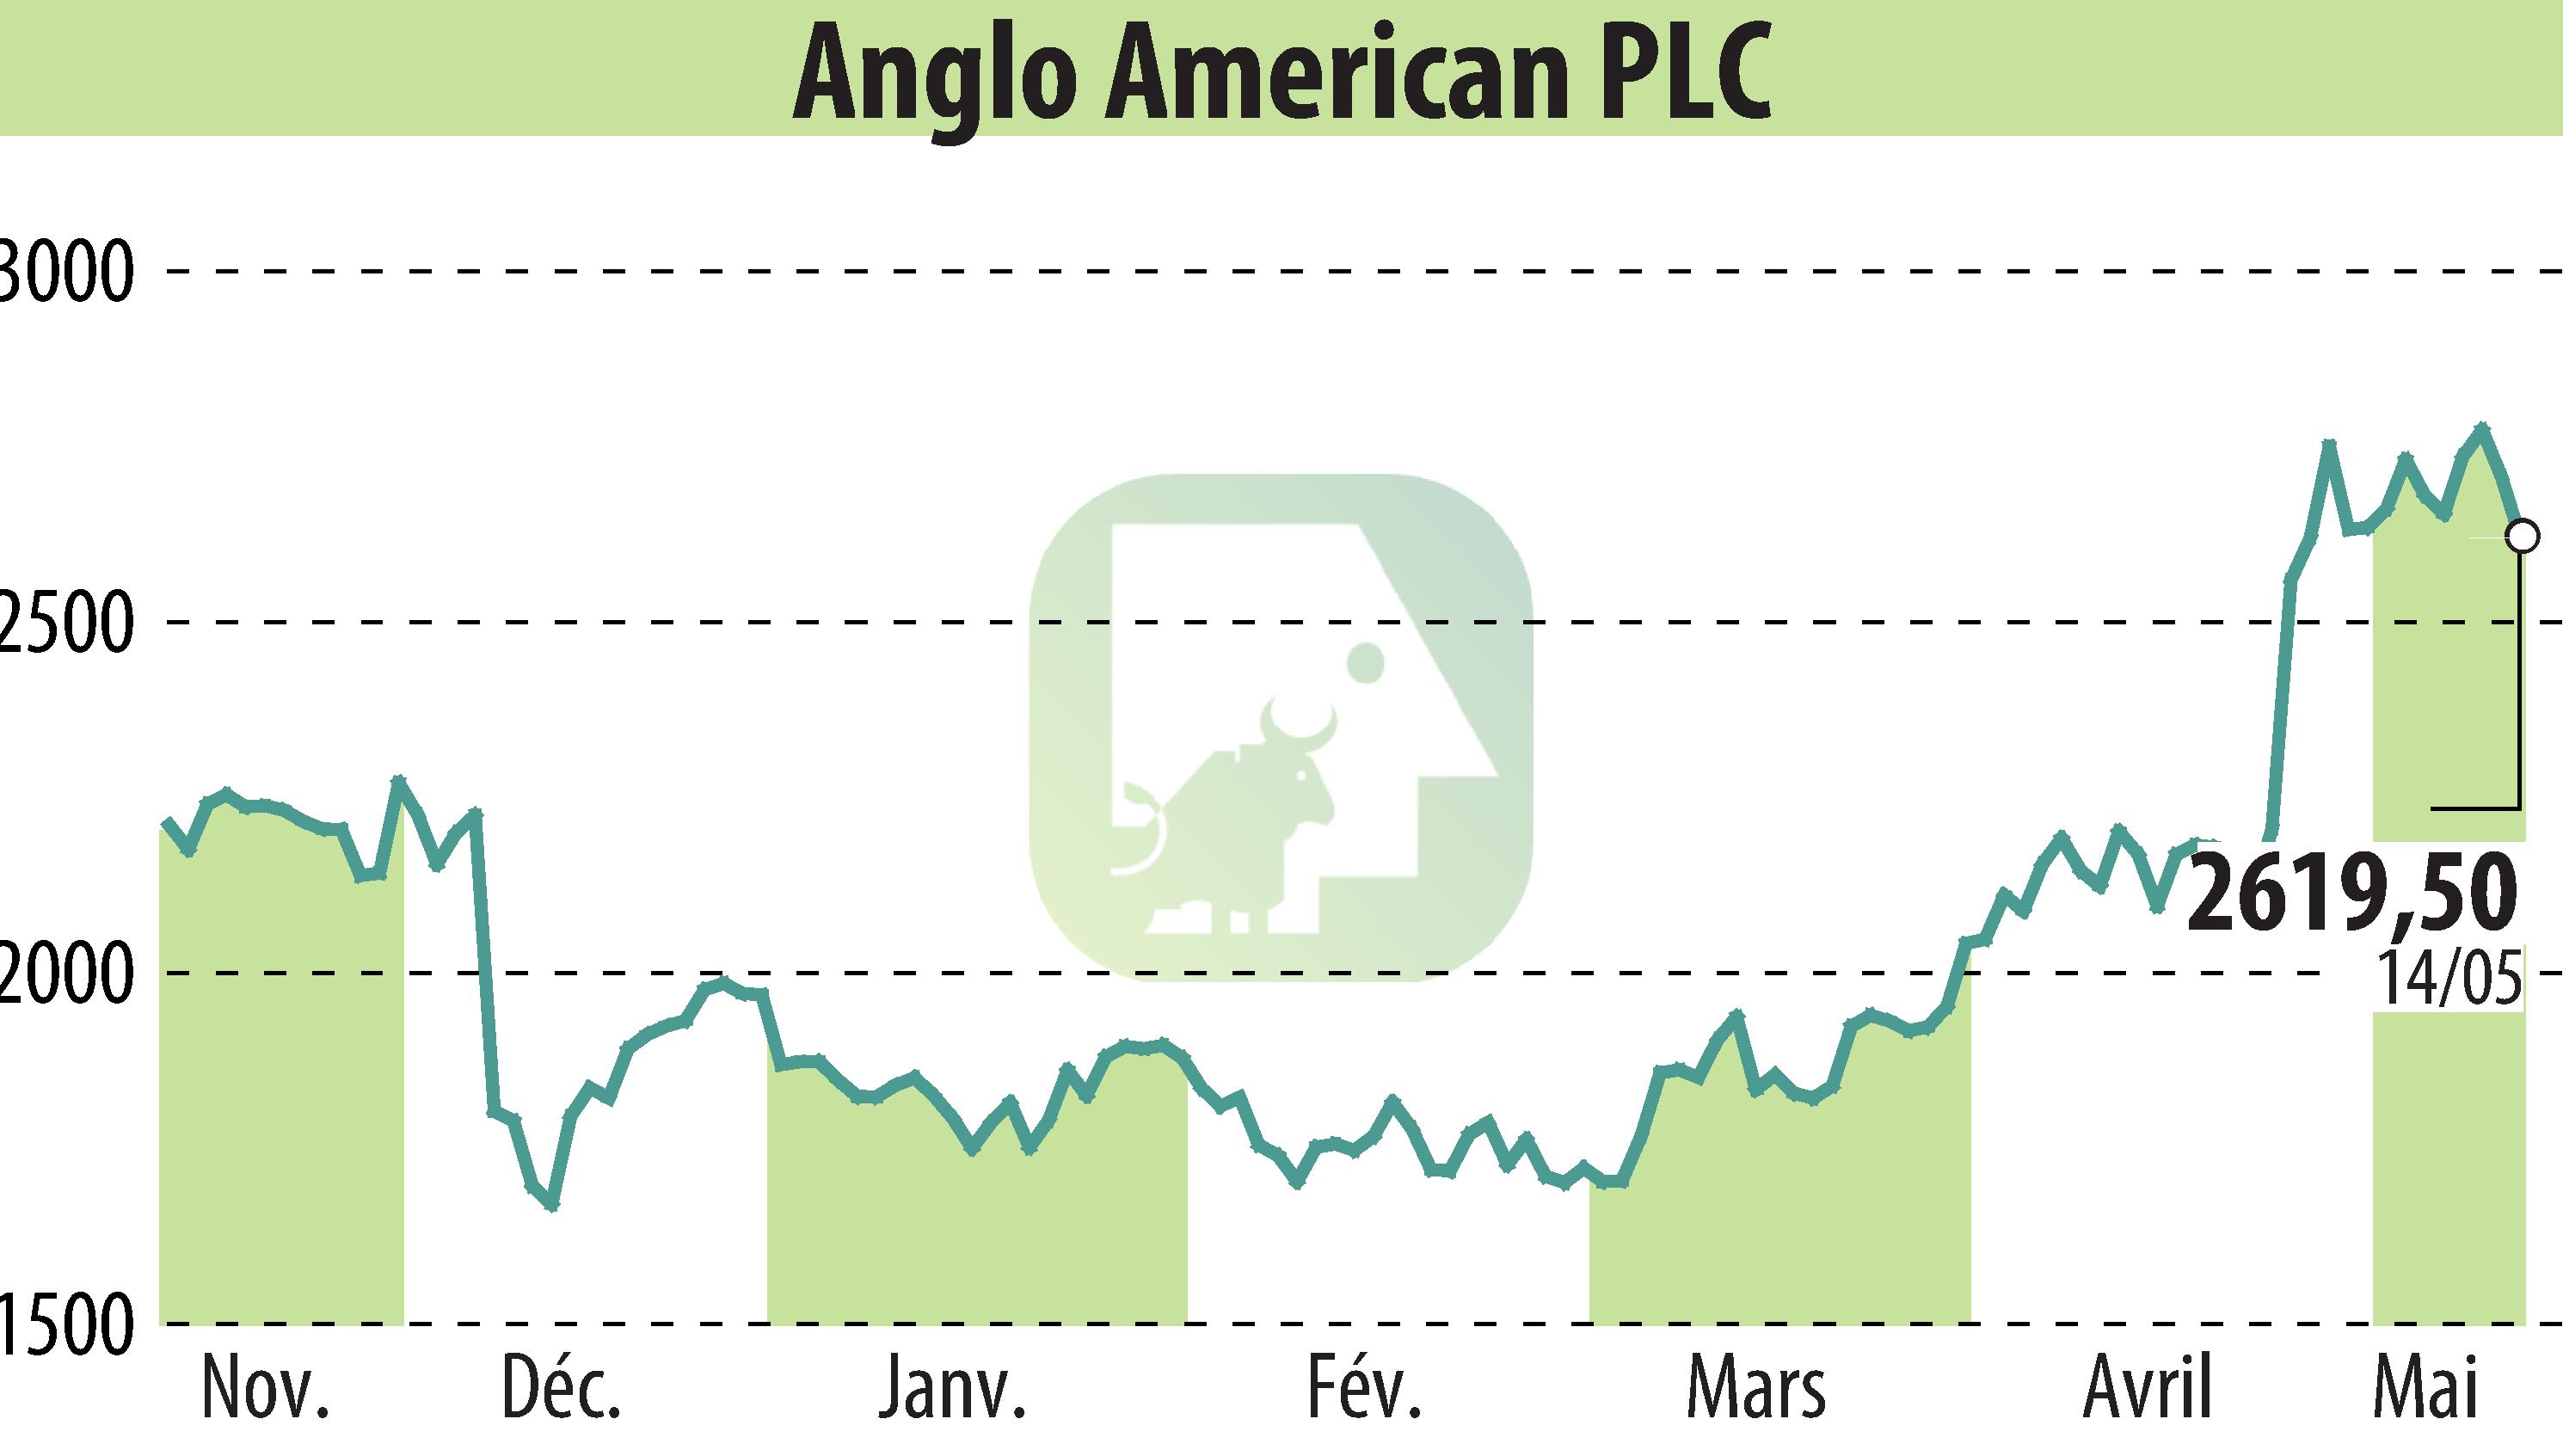 Stock price chart of Anglo American Plc (EBR:AAL) showing fluctuations.